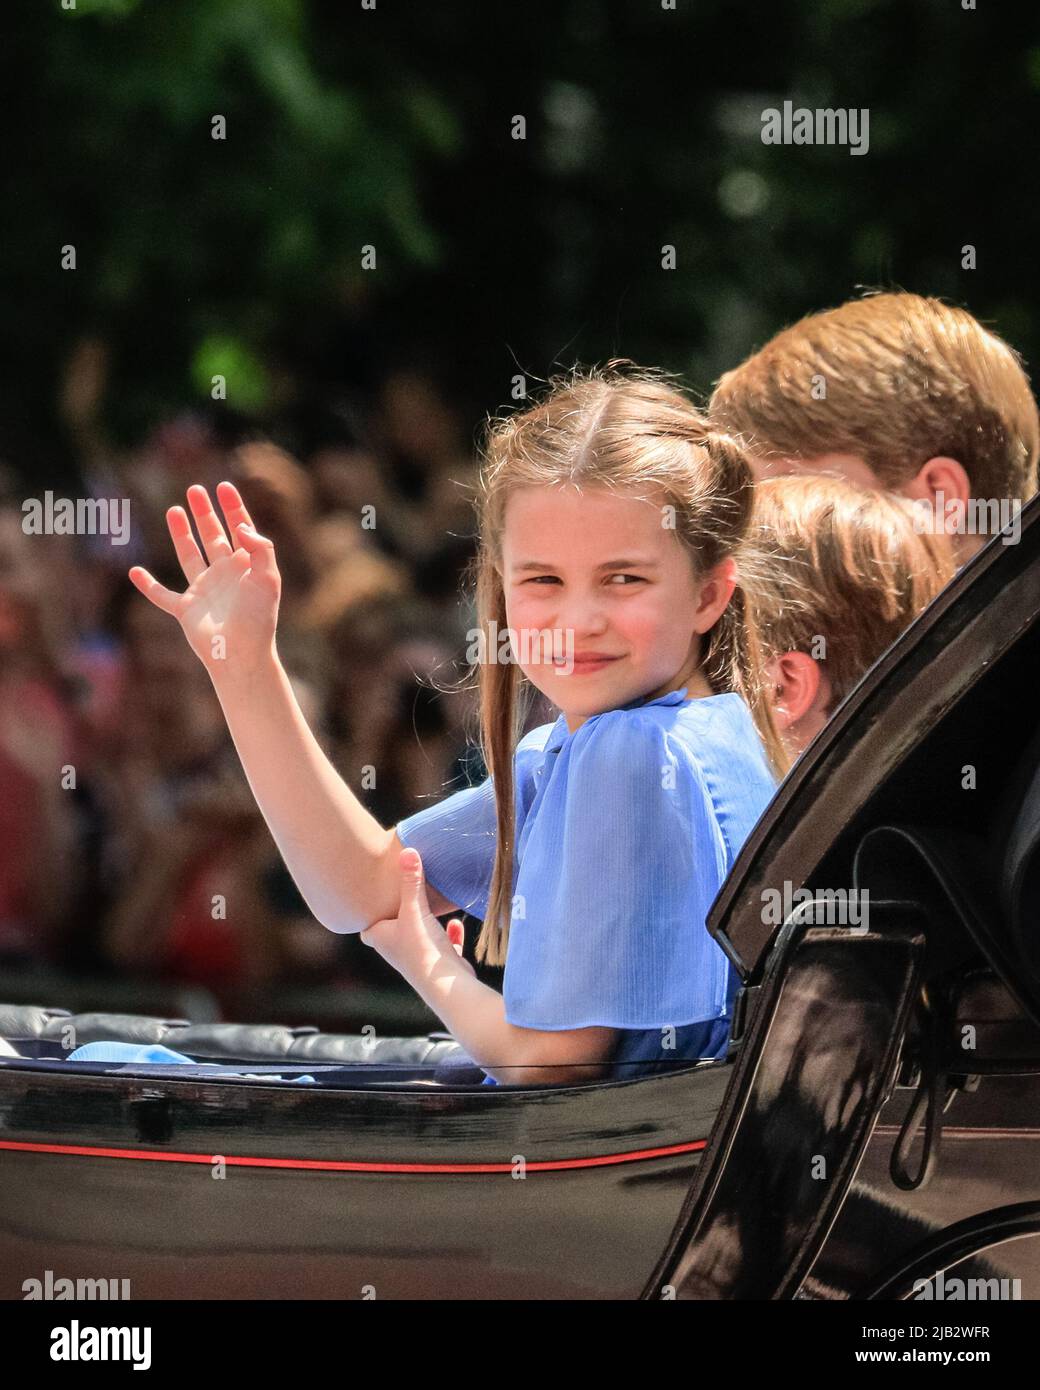 London, UK. 02nd June, 2022. Princess Charlotte waves from the carriage. Over 1,400 parading soldiers, 200 horses and 400 musicians from 10 bands in the traditional Parade mark The Queen's official birthday on the weekend which this year also sees her Platinum Jubilee. The Parade moves down The Mall to Horse Guard's Parade, joined by members of the Royal Family on horseback and in carriage and closes with the traditional RAF fly-past, watched by the Royal Family from the Buckingham Palace balcony. Stock Photo